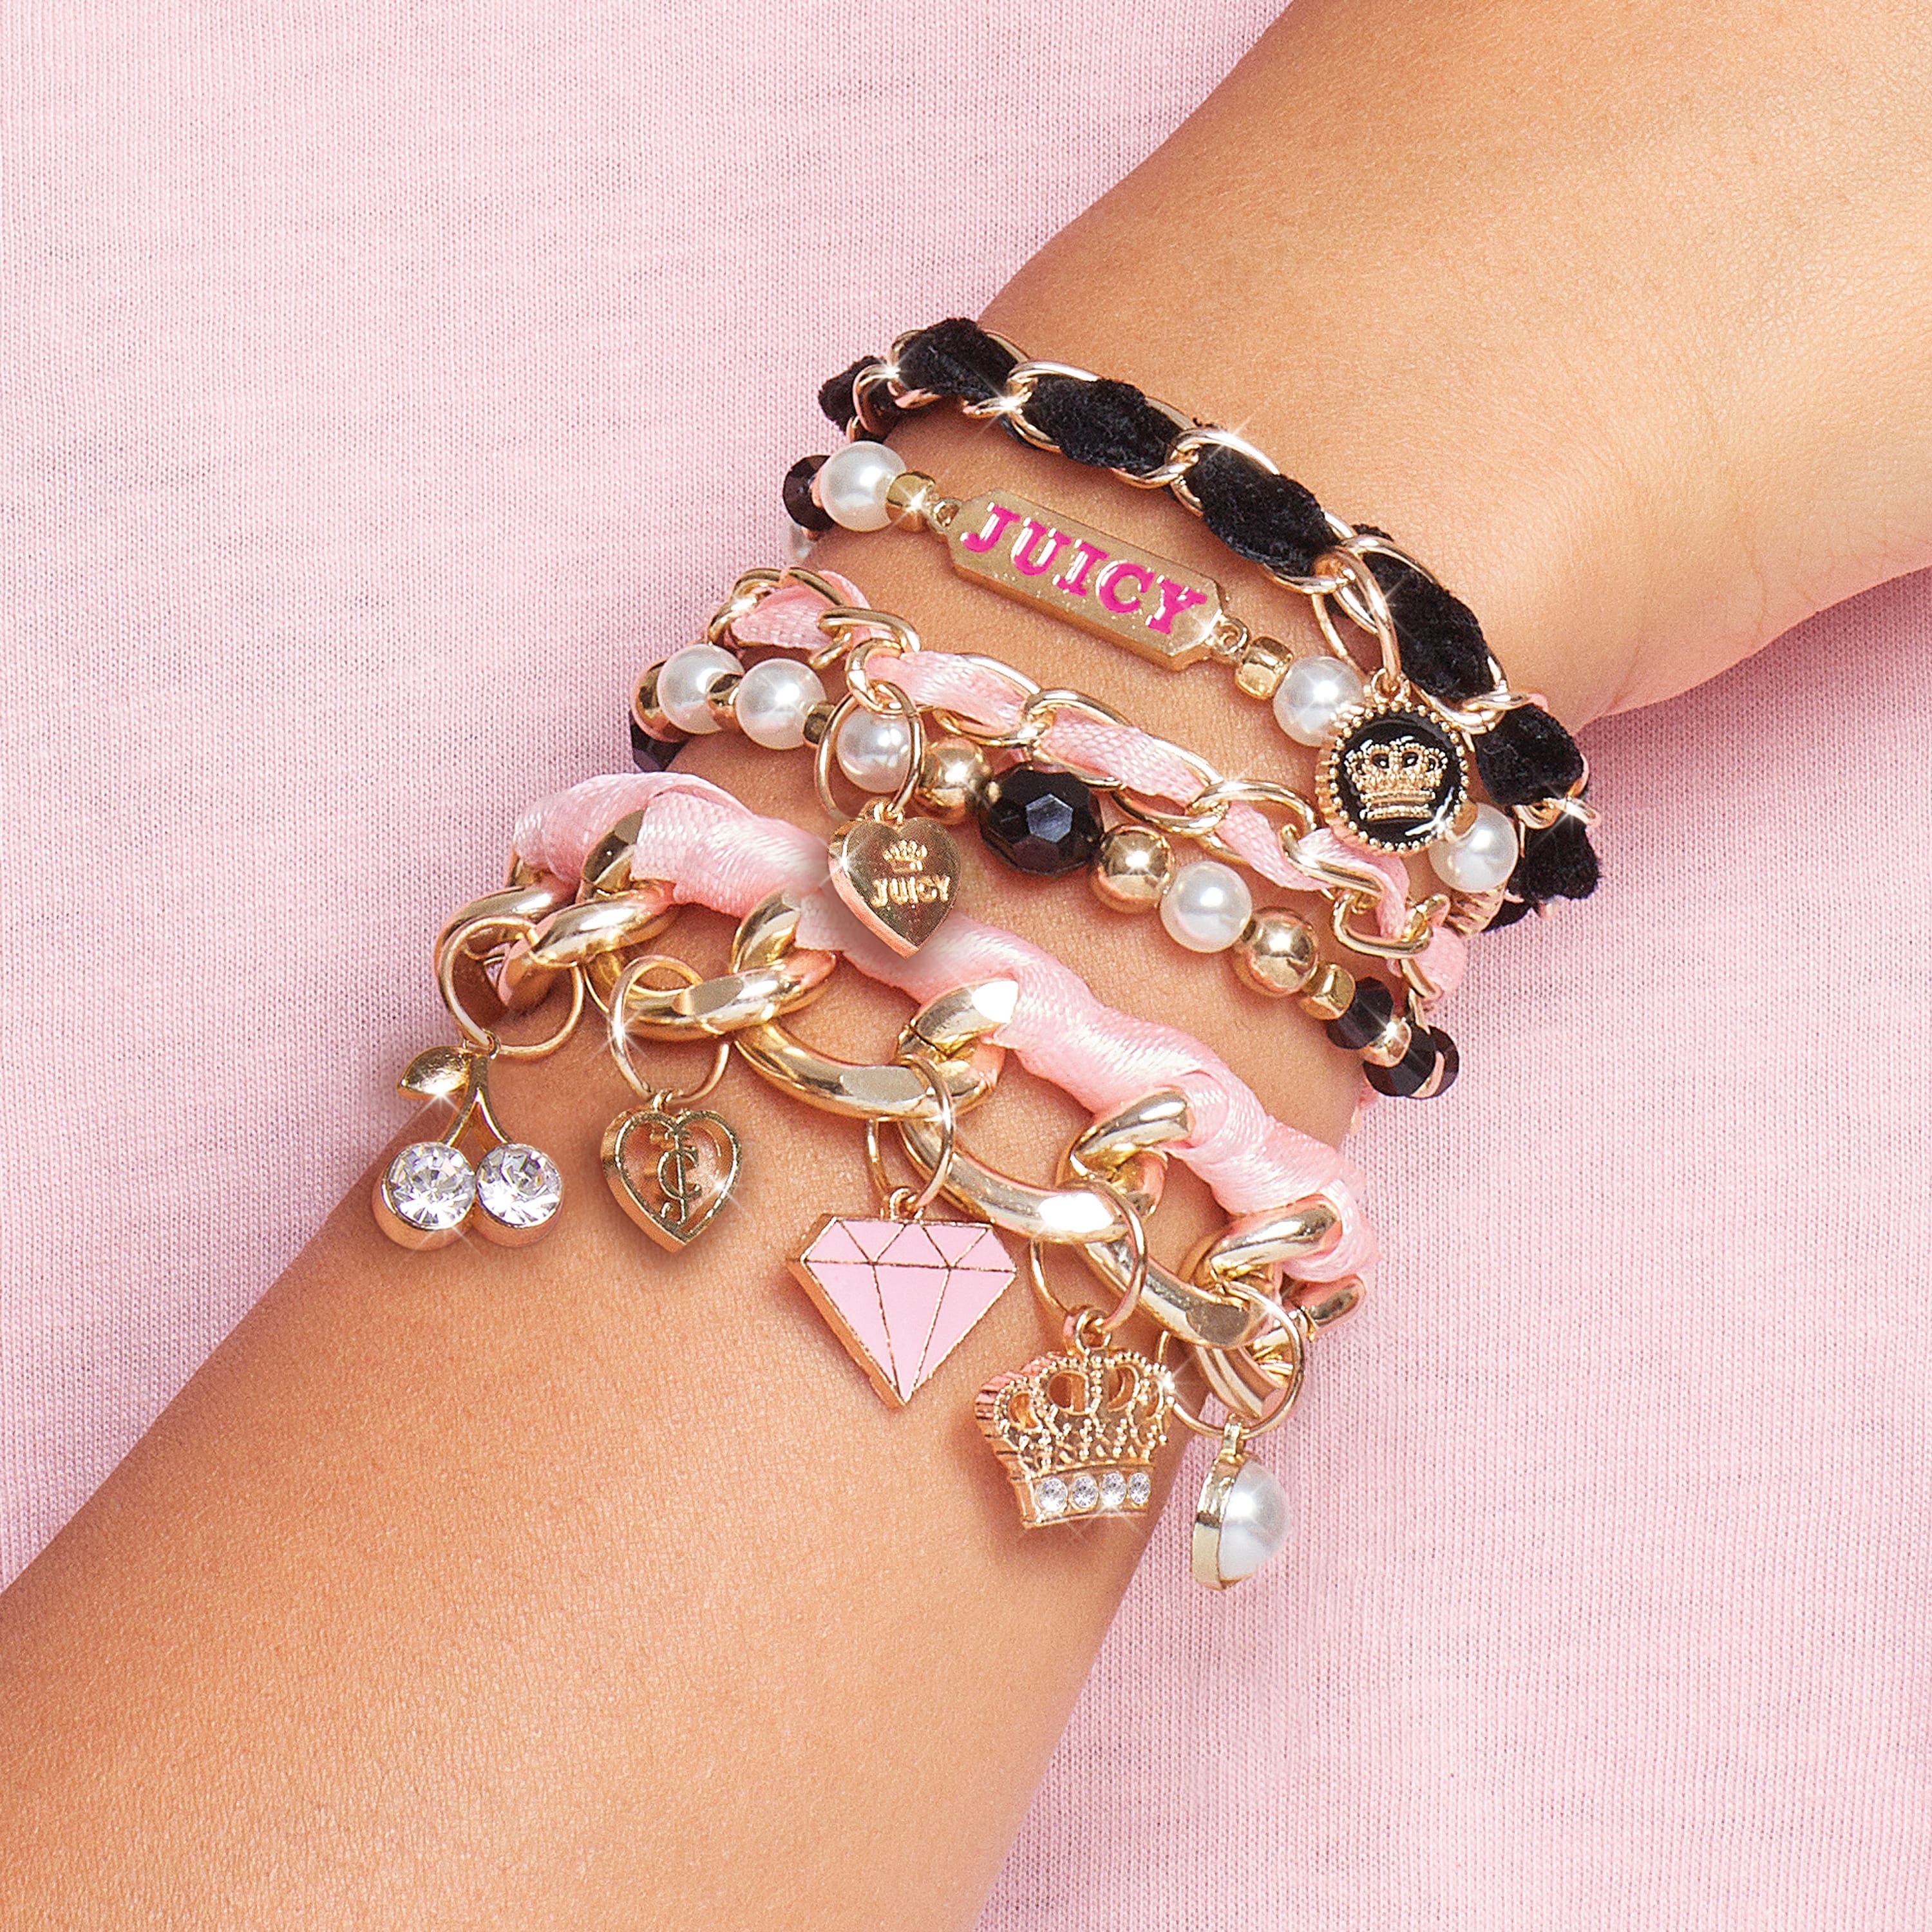 Make It Real - Making Juicy Couture Charming Bracelets